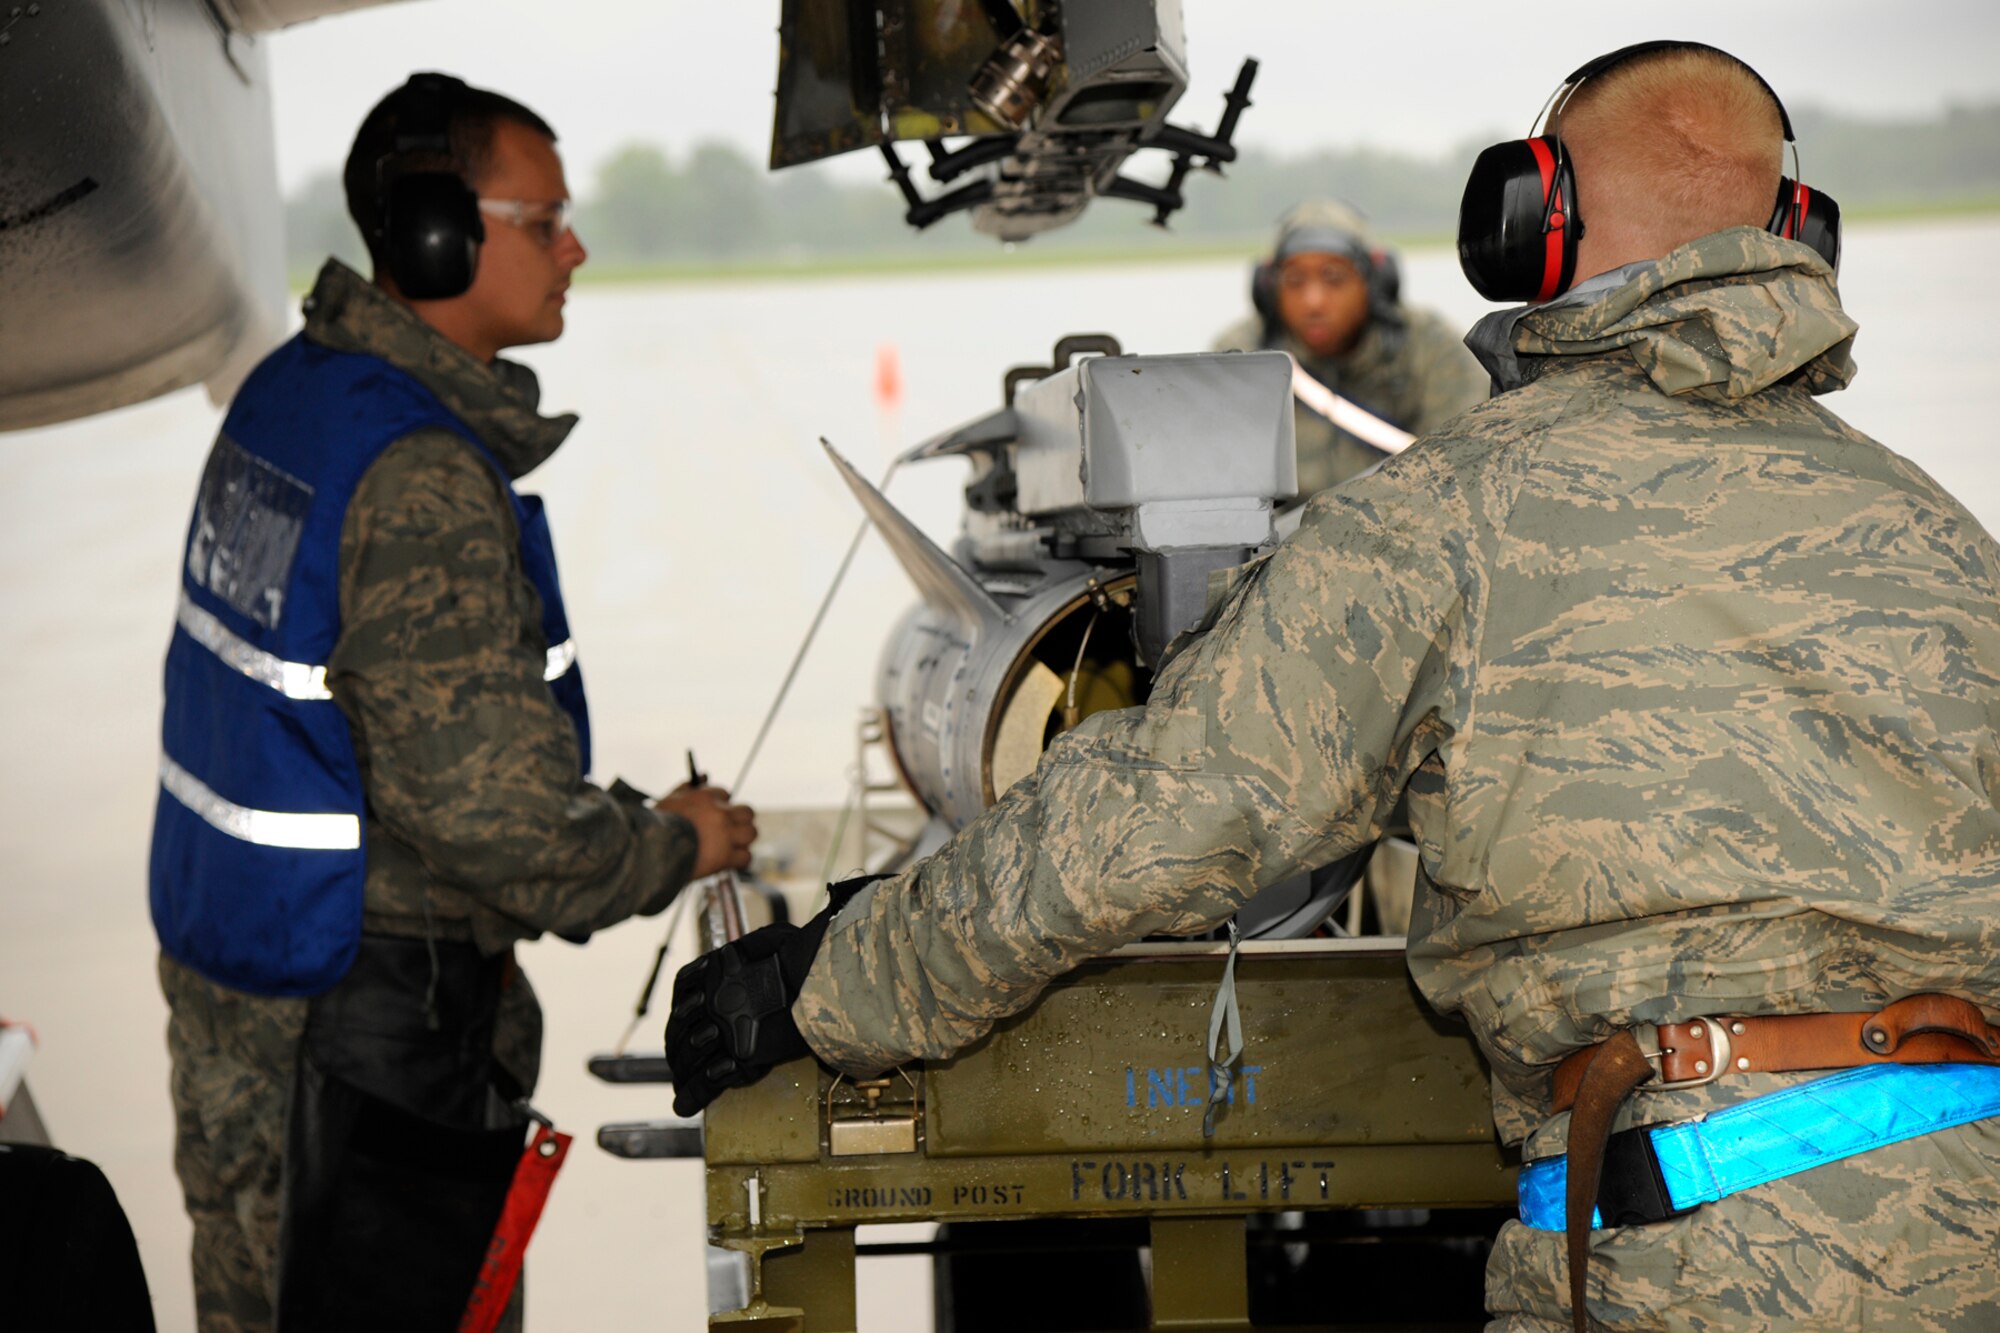 Airmen of the 127th Aircraft Maintenance Squadron load an AGM-65 air-to-ground training missile on to an A-10 Thunderbolt II as part of flight operations at Selfridge Air National Guard Base, Mich., Aug. 10, 2012.  The 127th AMXS crews launched, recovered, and turned A-10s throughout the day, during a surge operation.  (Air National Guard photo by TSgt. David Kujawa)